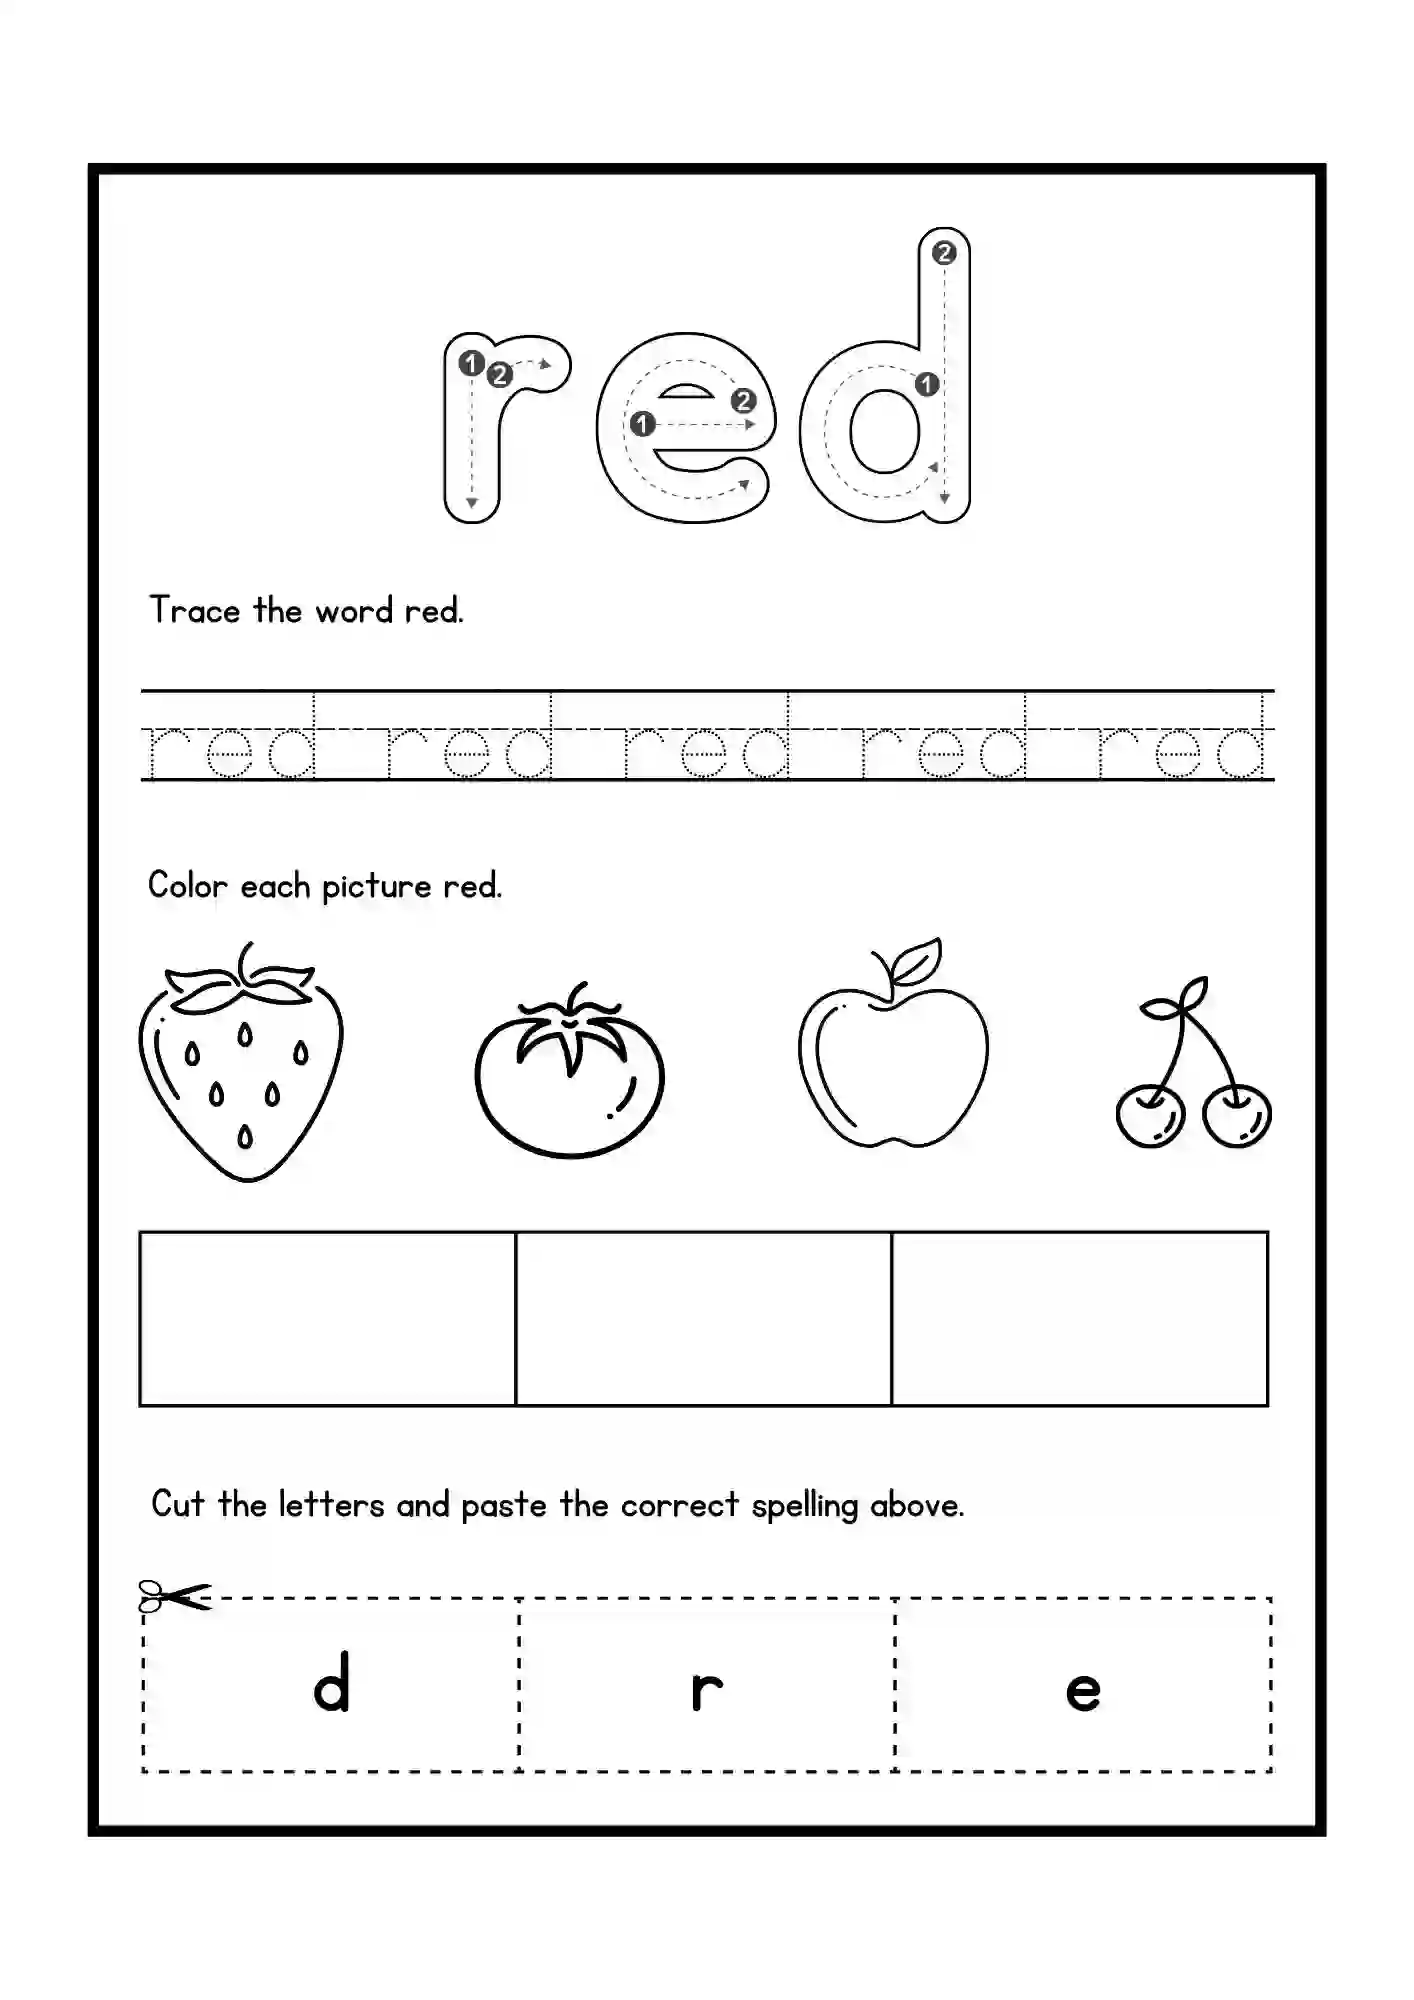 Color Fun Activity Worksheets color red